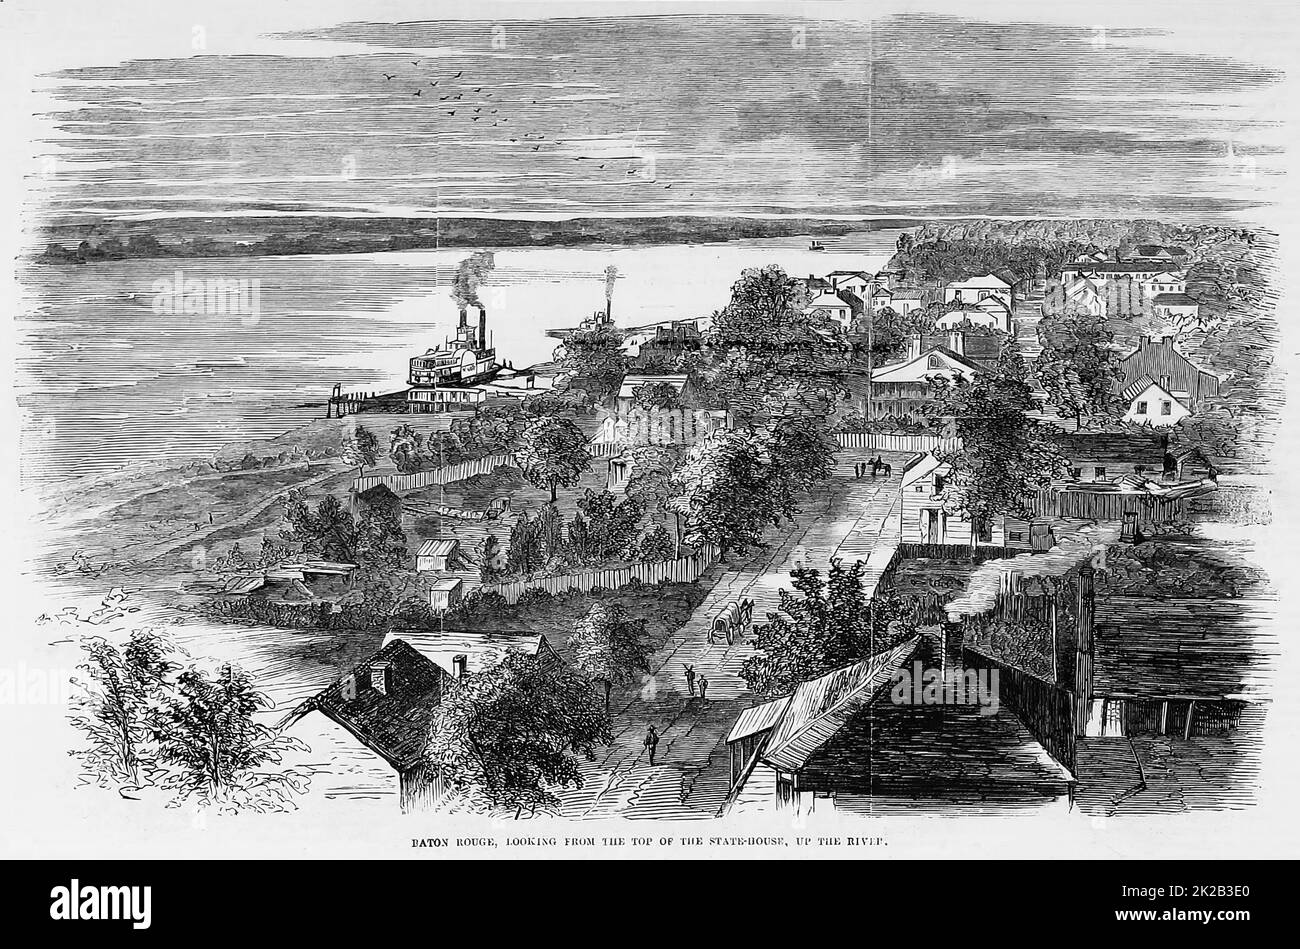 Baton Rouge, Louisiana, looking from the top of the state-house, up the Mississippi River. 1862. 19th century American Civil War illustration from Frank Leslie's Illustrated Newspaper Stock Photo